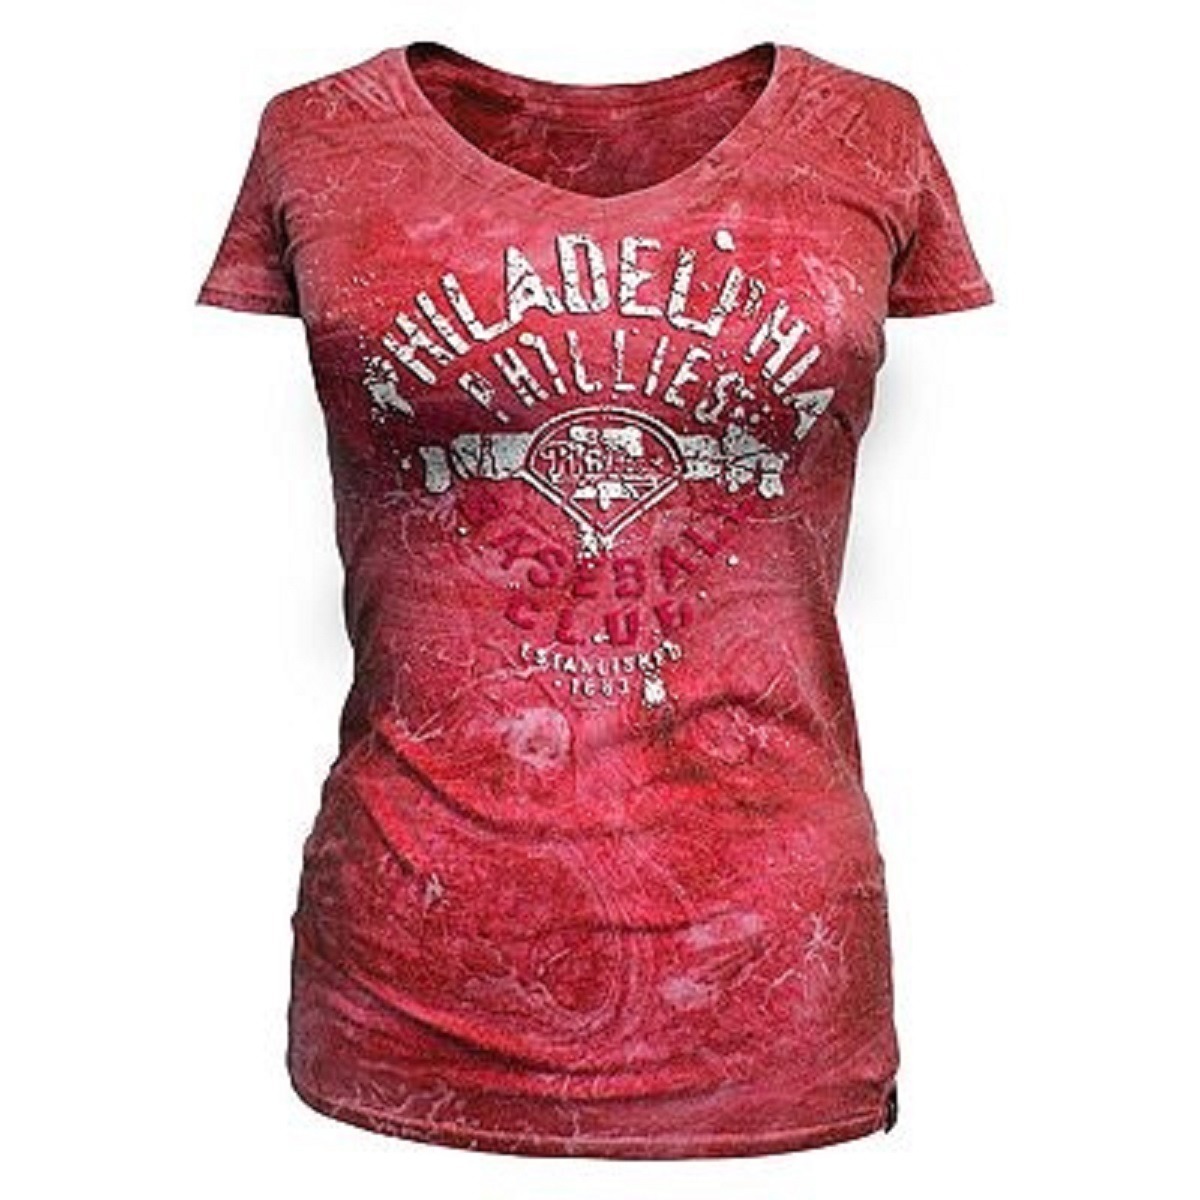 Primary image for MLB  Woman's  Philadelphia Phillies Distressed Tee L XL Officially Licensed NWT